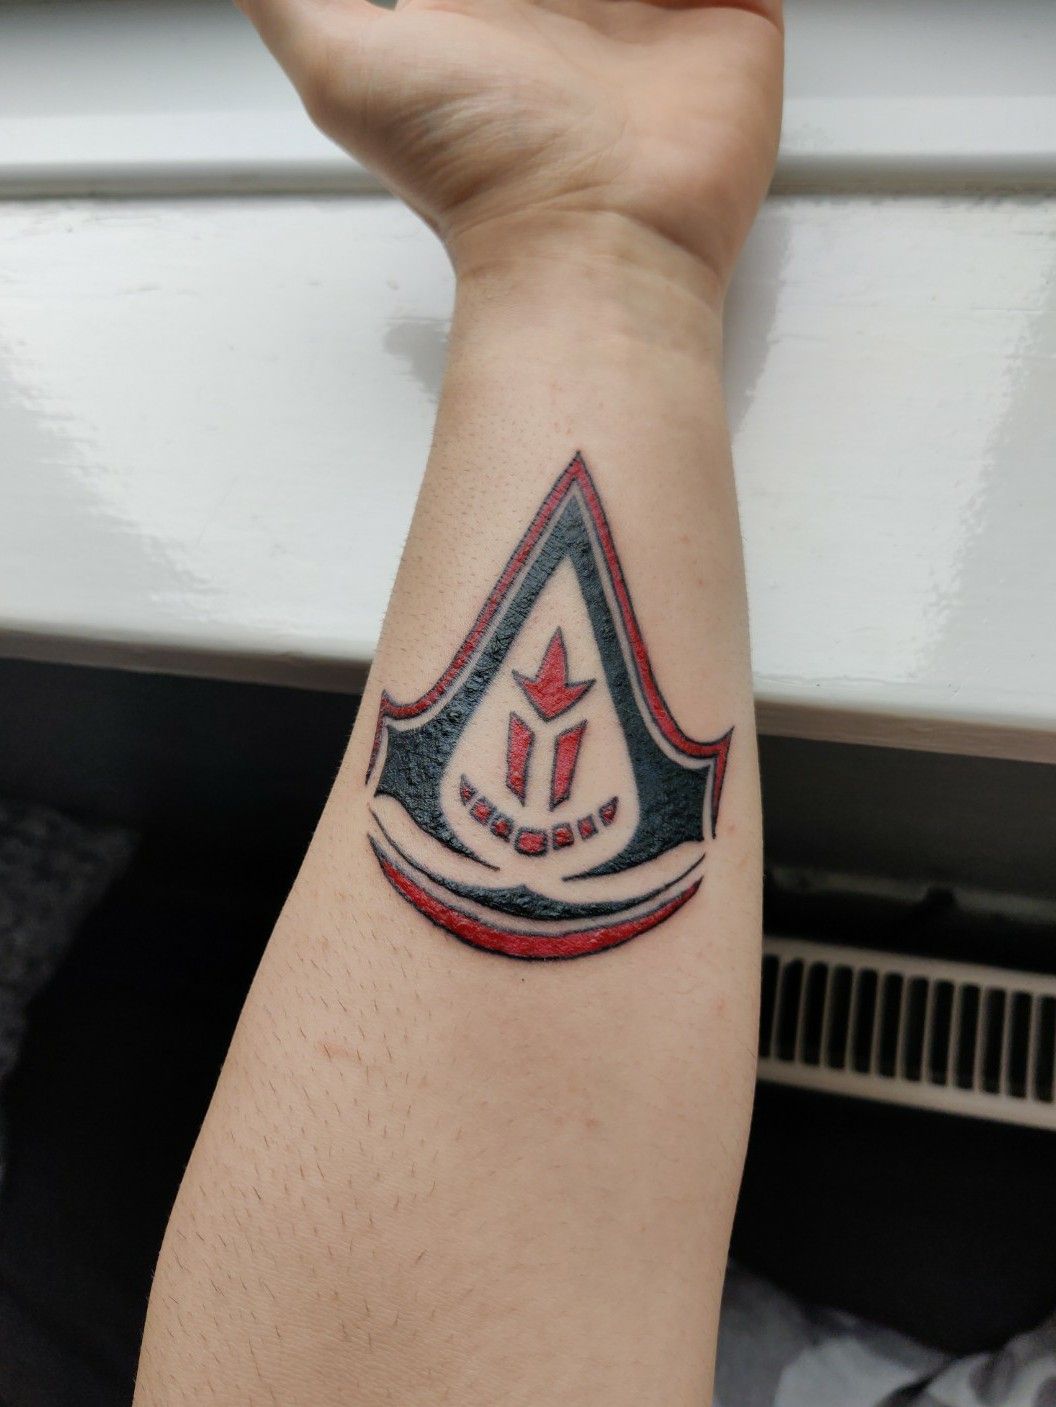 20 Attractive Assassins Creed Tattoos Ideas For You